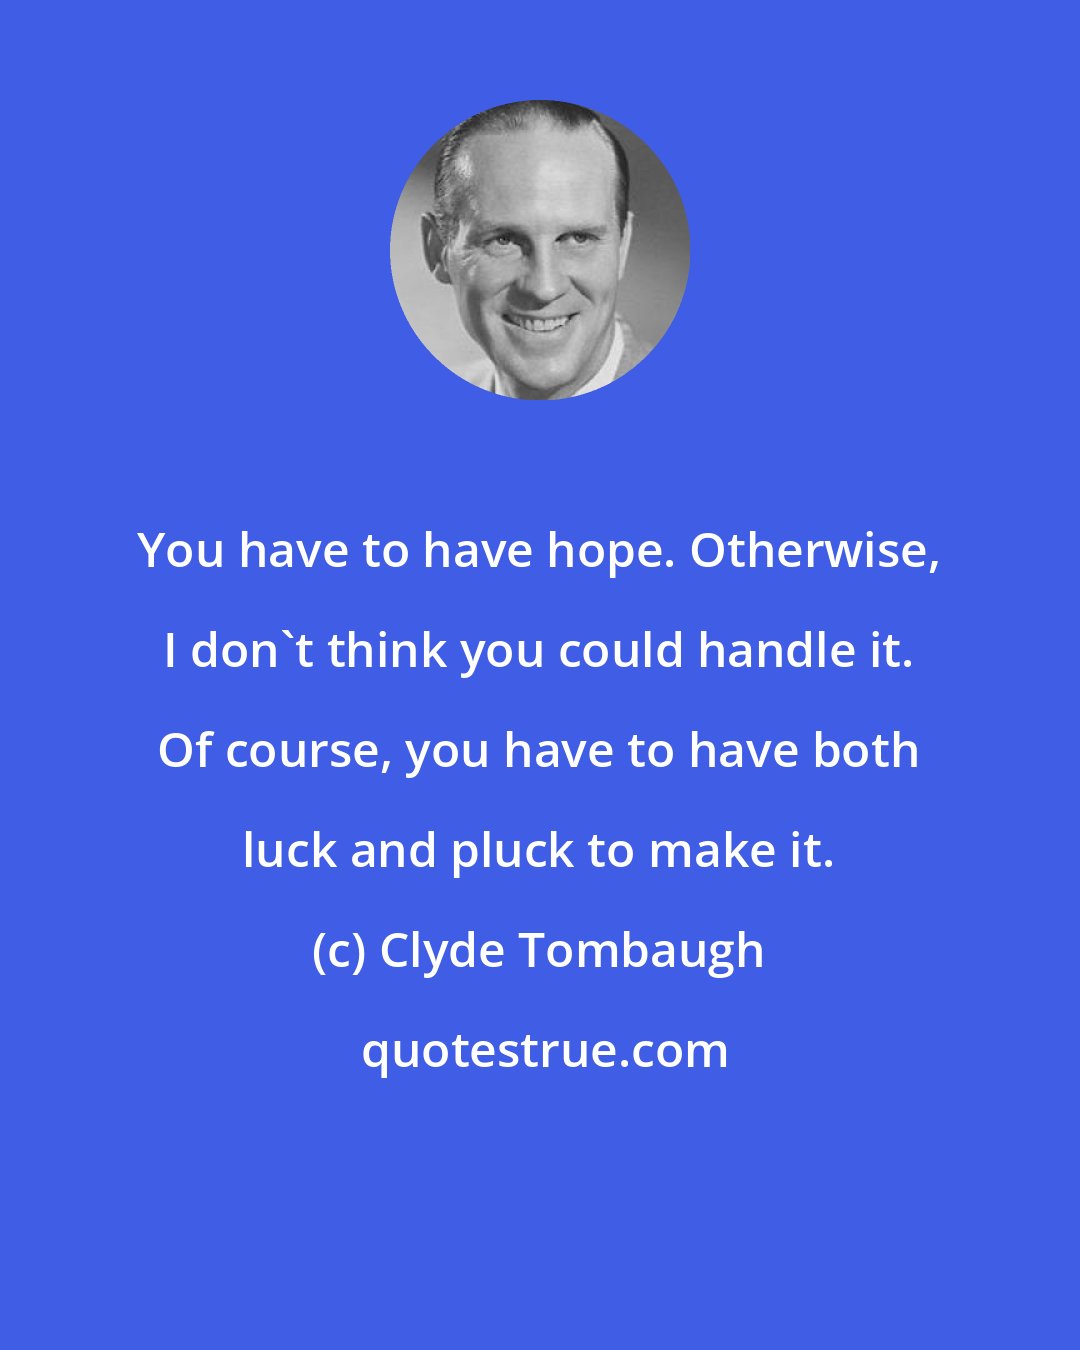 Clyde Tombaugh: You have to have hope. Otherwise, I don't think you could handle it. Of course, you have to have both luck and pluck to make it.